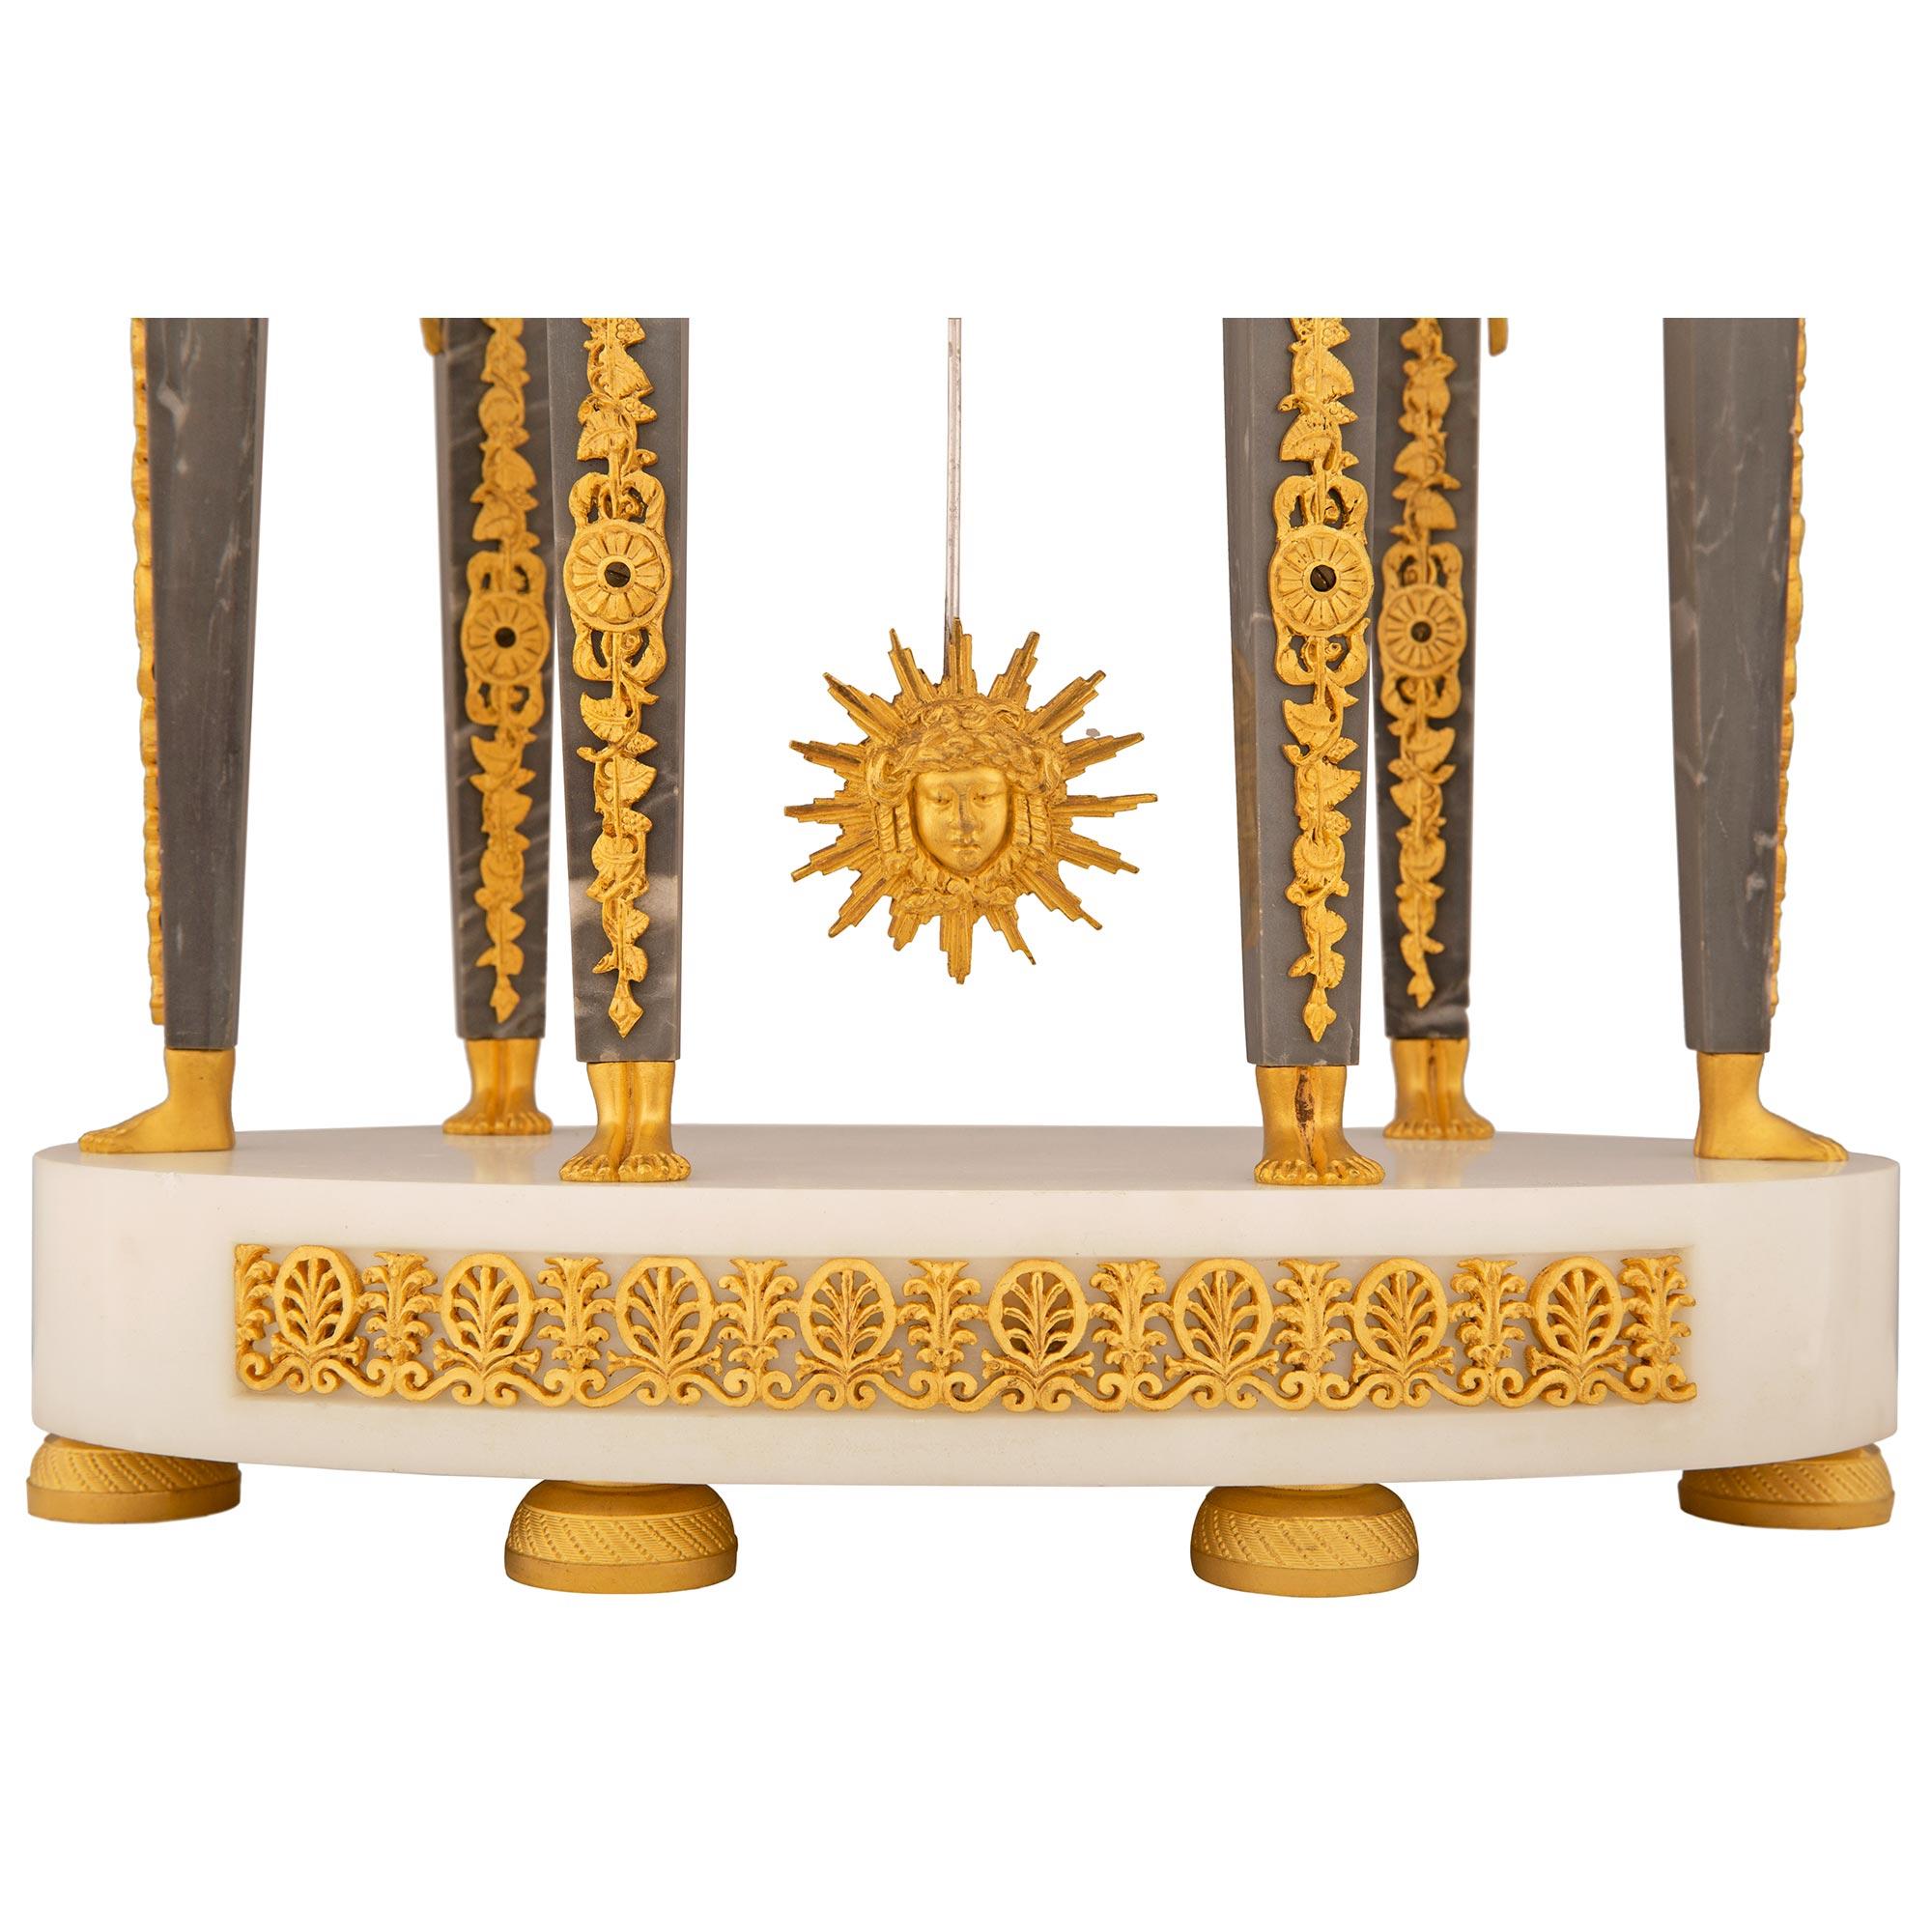 French 19th century Empire st. Gris st. Anne, Carrara marble, and Ormolu clock For Sale 5